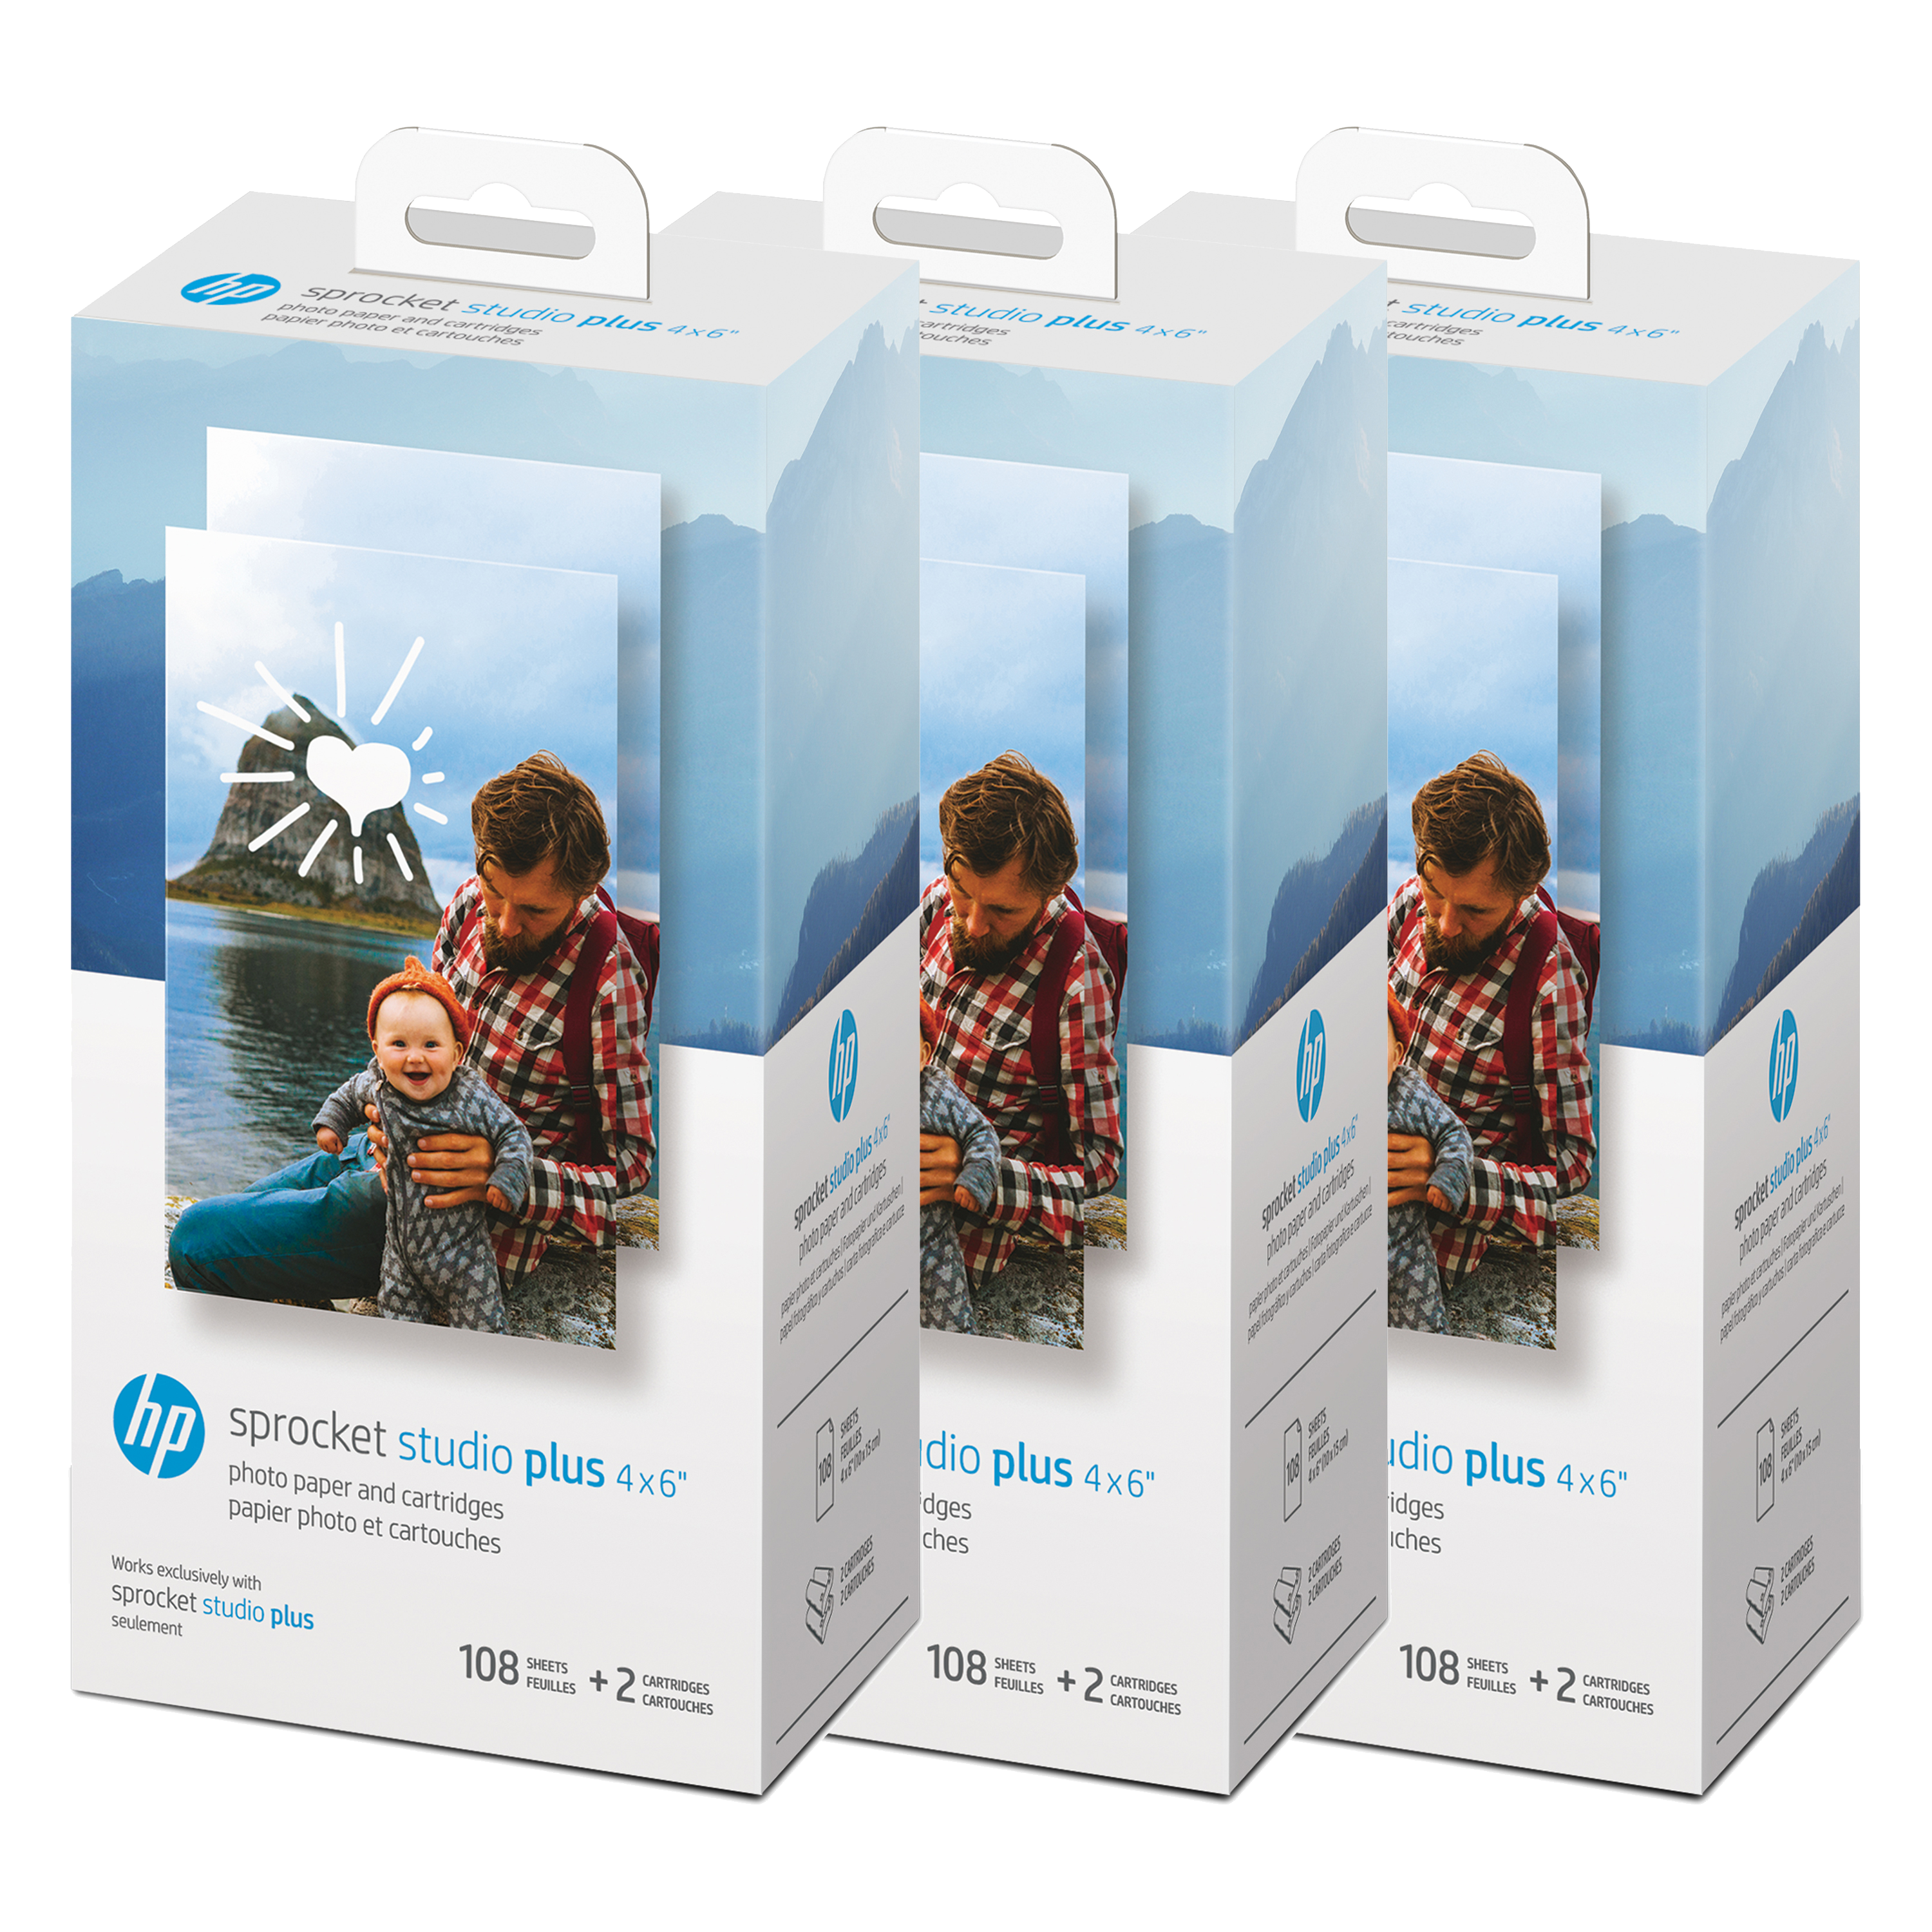 HP Sprocket Studio Plus 4 x 6” Photo Paper and Cartridges (Includes 324 Sheets and 6 Cartridges) – Compatible only with HP Sprocket Studio Plus printer Sprocket Printers CA